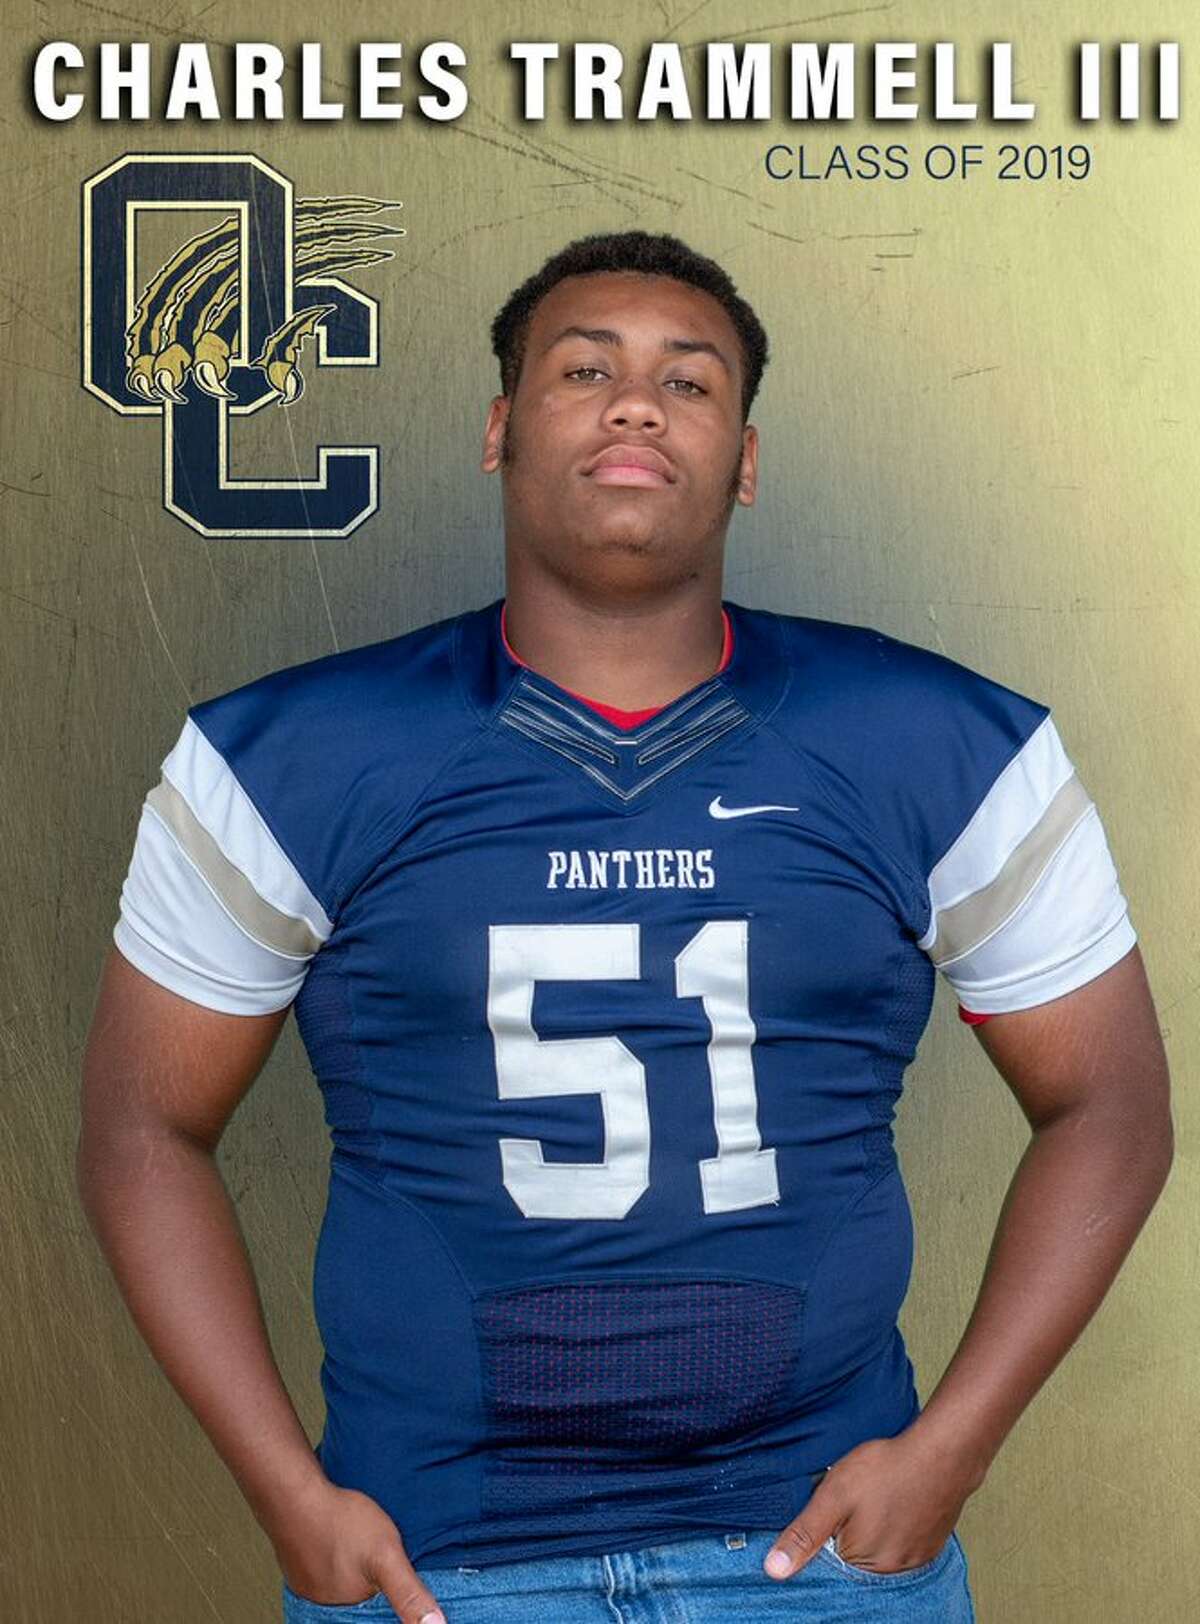 Charles Trammell, a former O'Connor High football player, died Saturday Aug. 27, 2022, after being struck by a car.